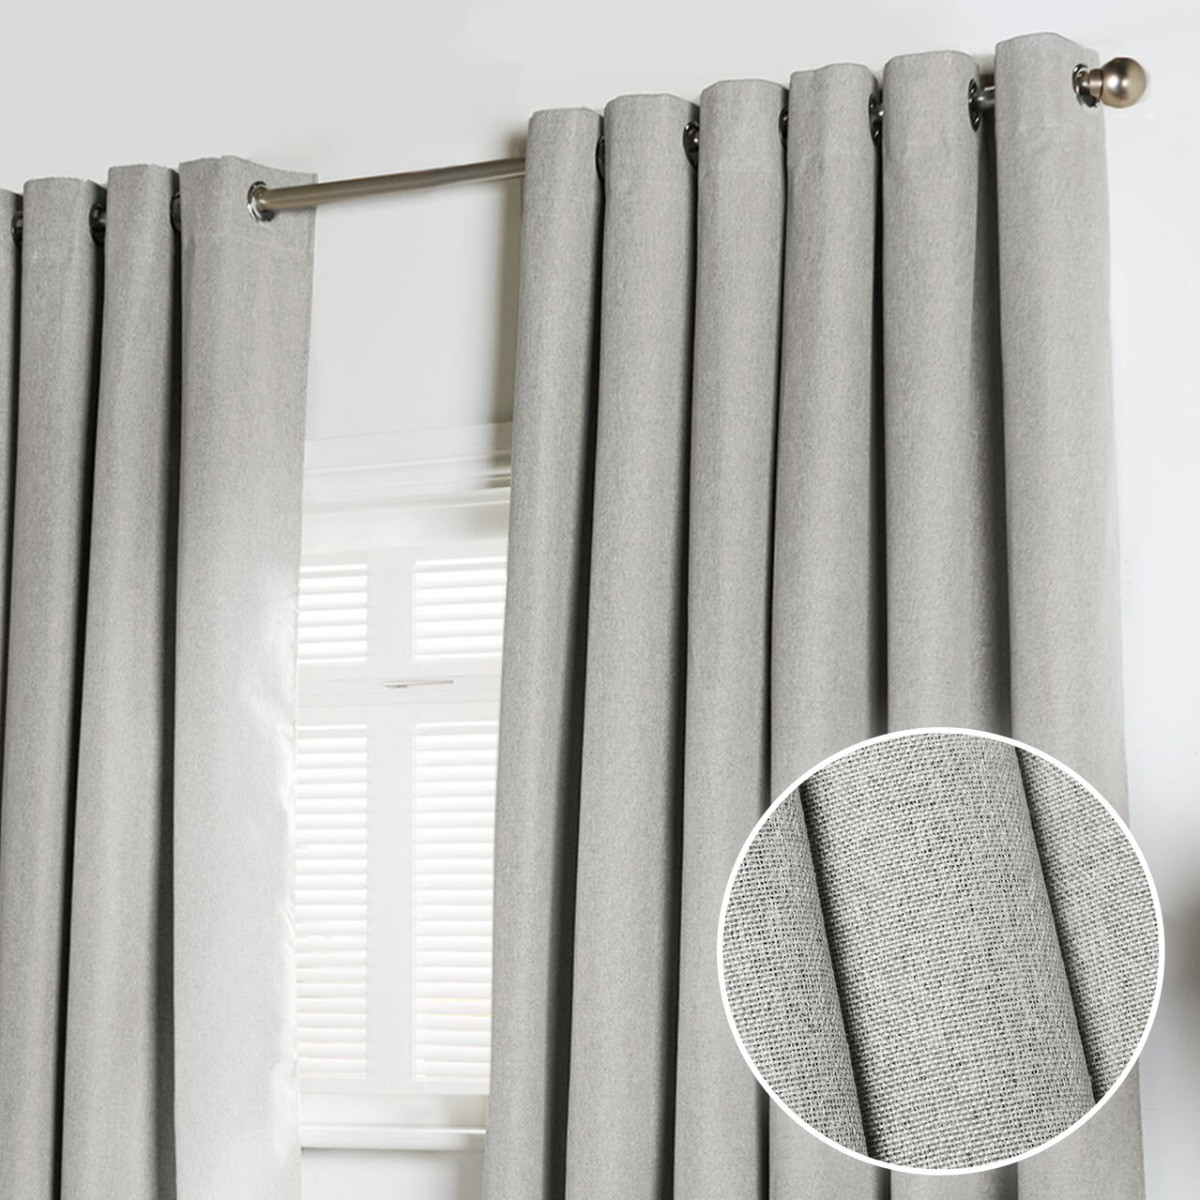 OHS Woven Texture Eyelet Ultra Blackout Curtains - Silver>